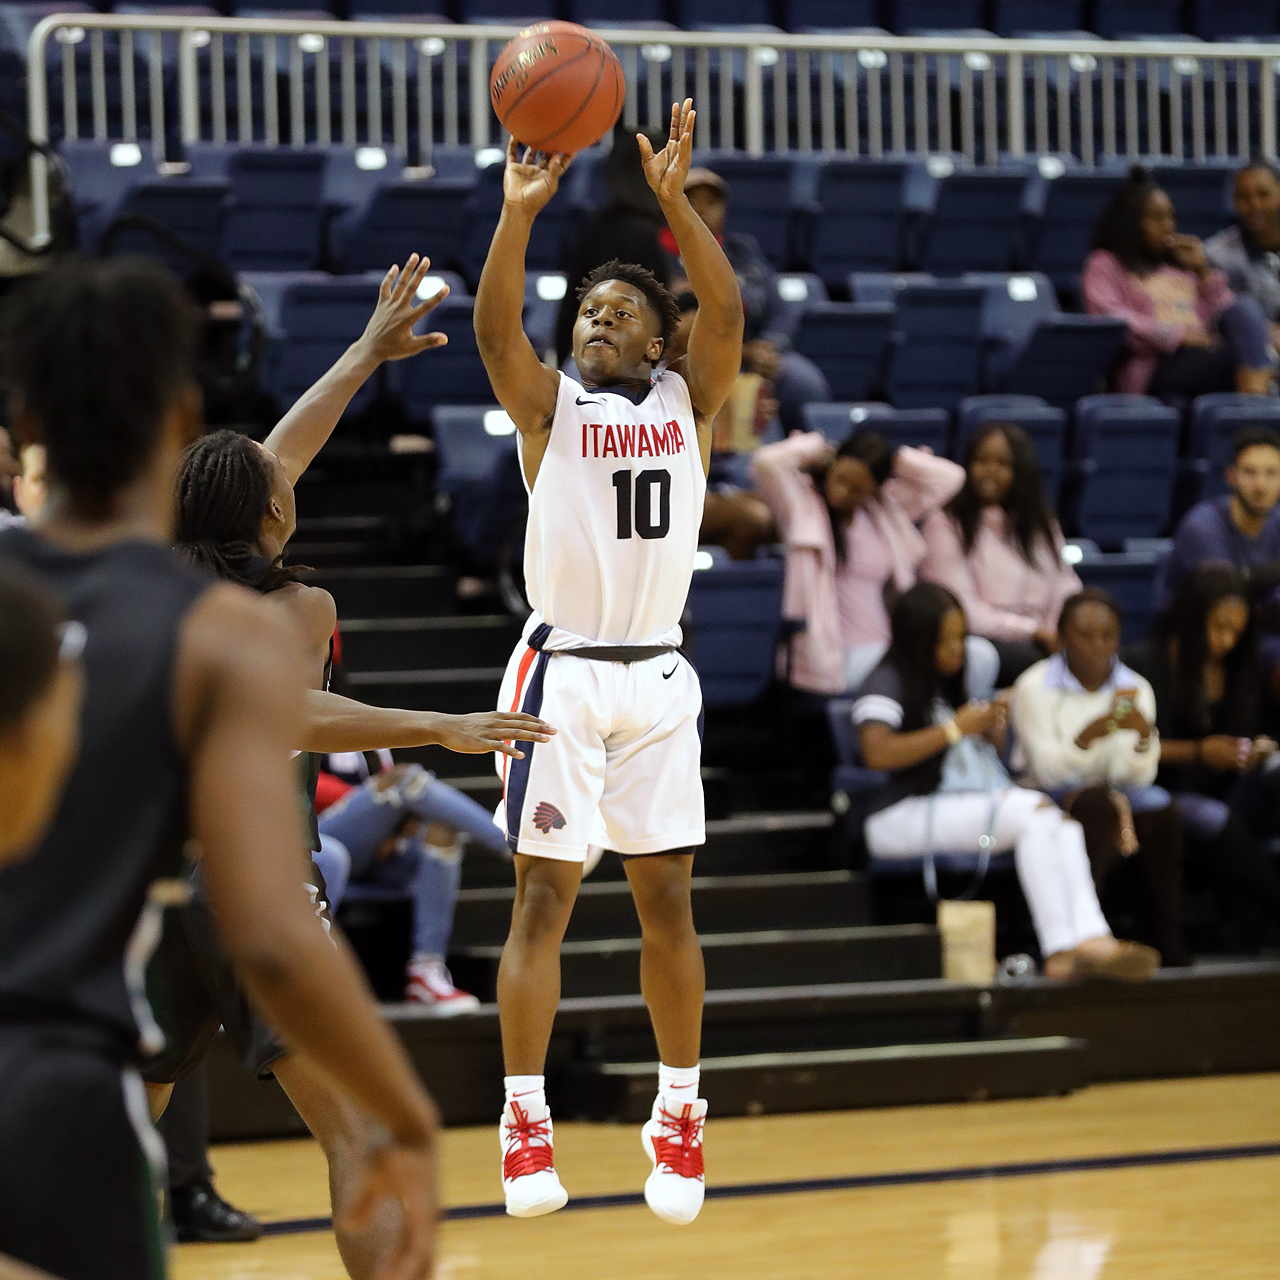 Indians fall to No. 21 Shelton State, 71-67